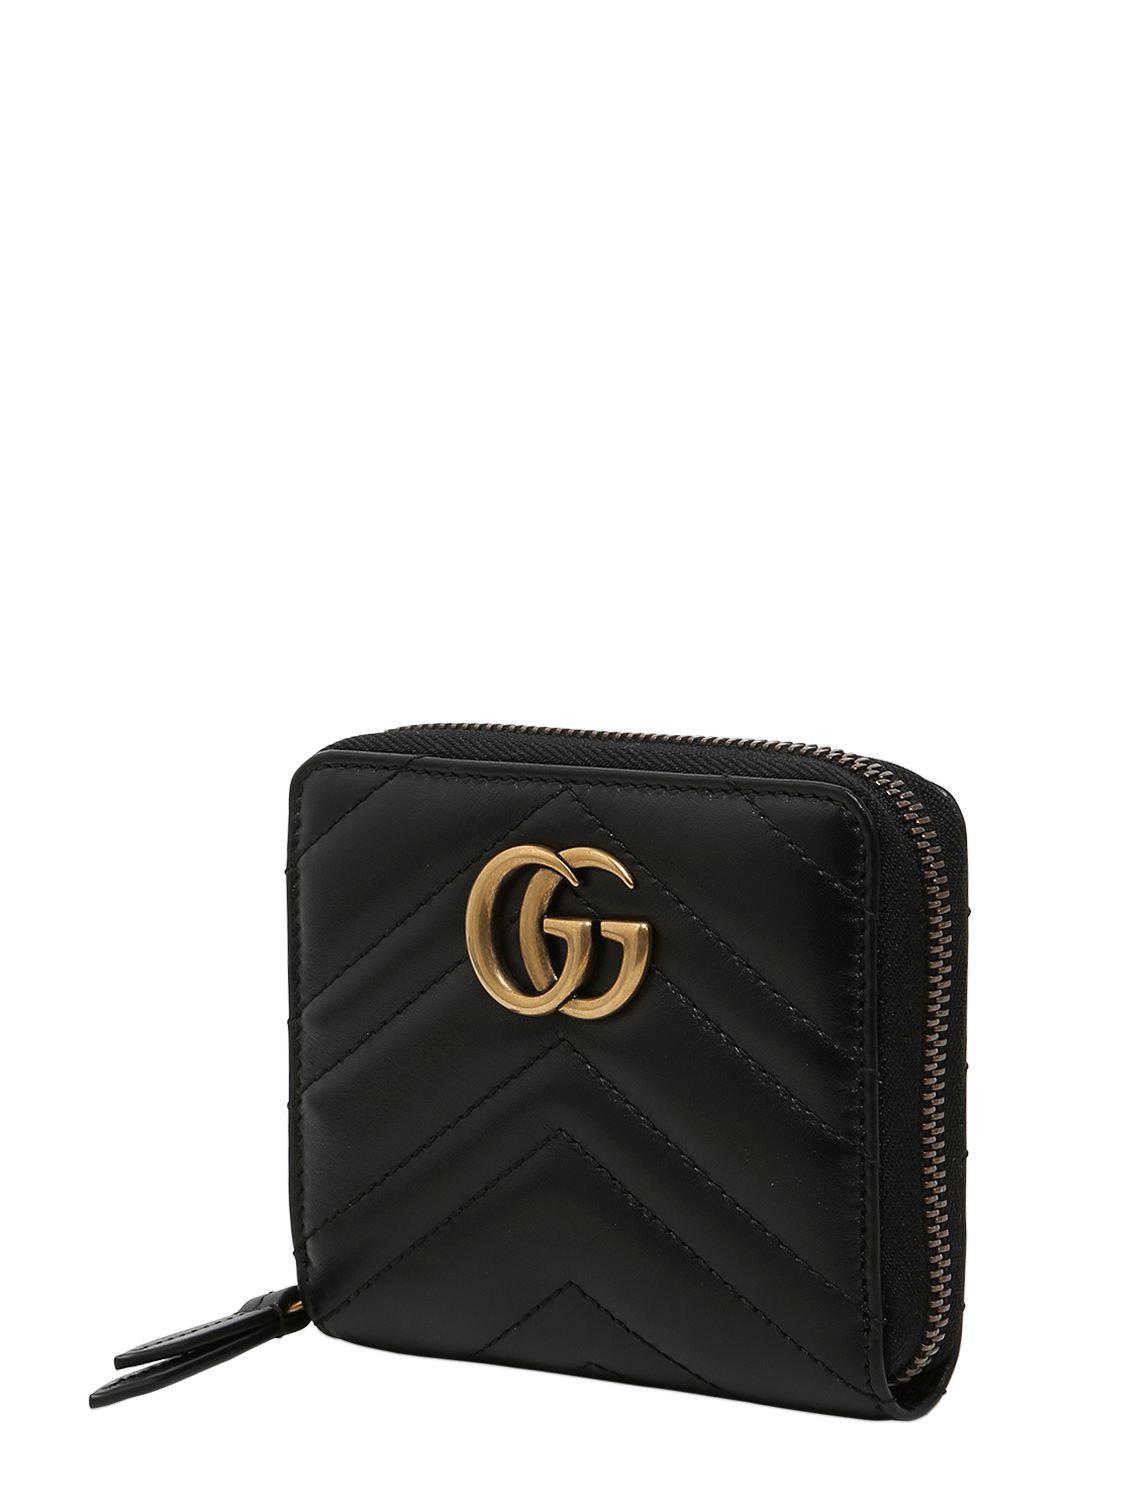 Gucci Small Gg Marmont 2.0 Leather Zip Wallet in Black | Lyst